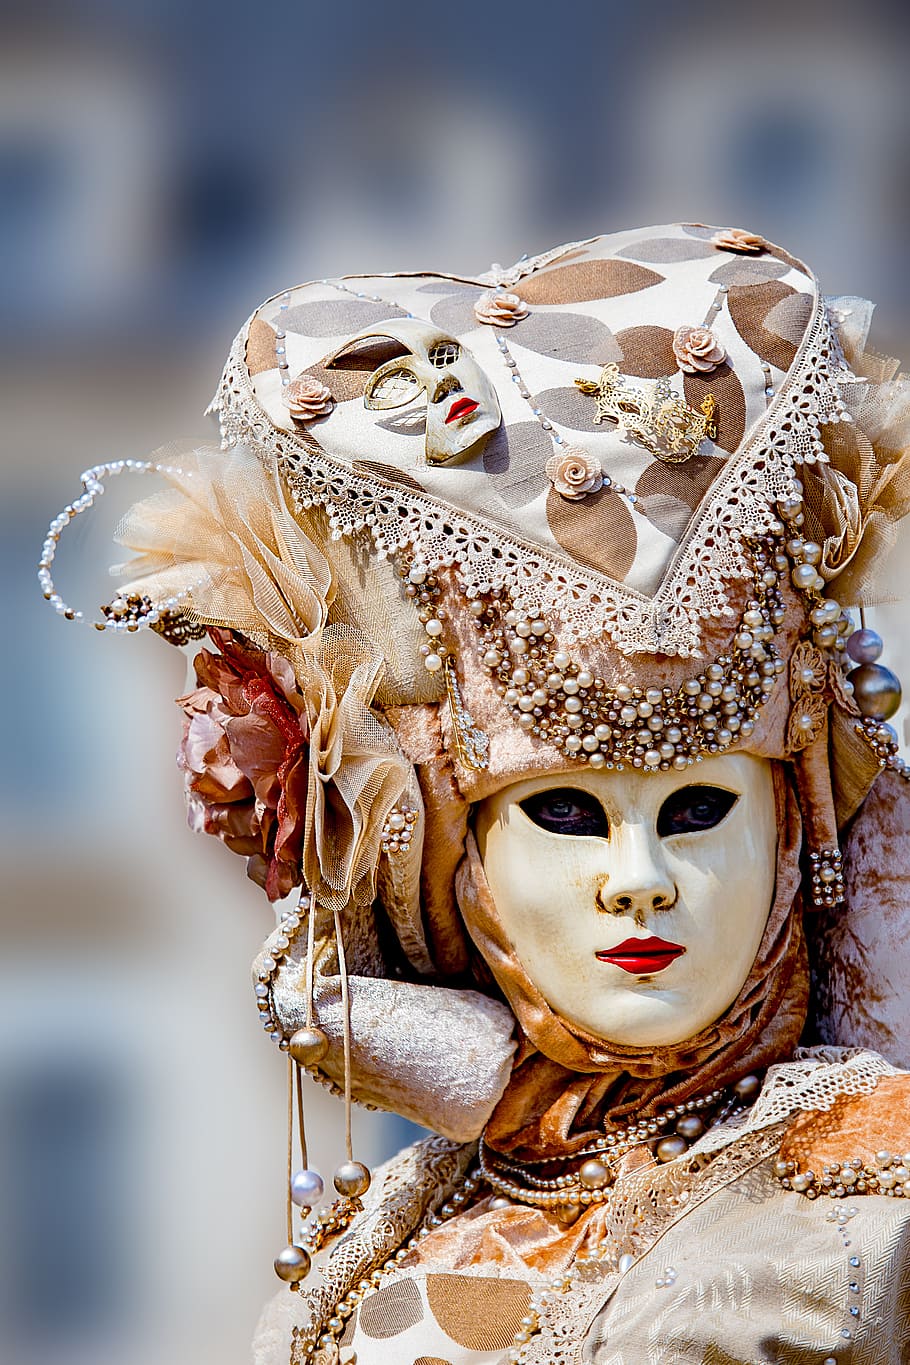 parade, Cheverny, person, full-face, mask, celebration, mask - disguise, disguise, close-up, human representation